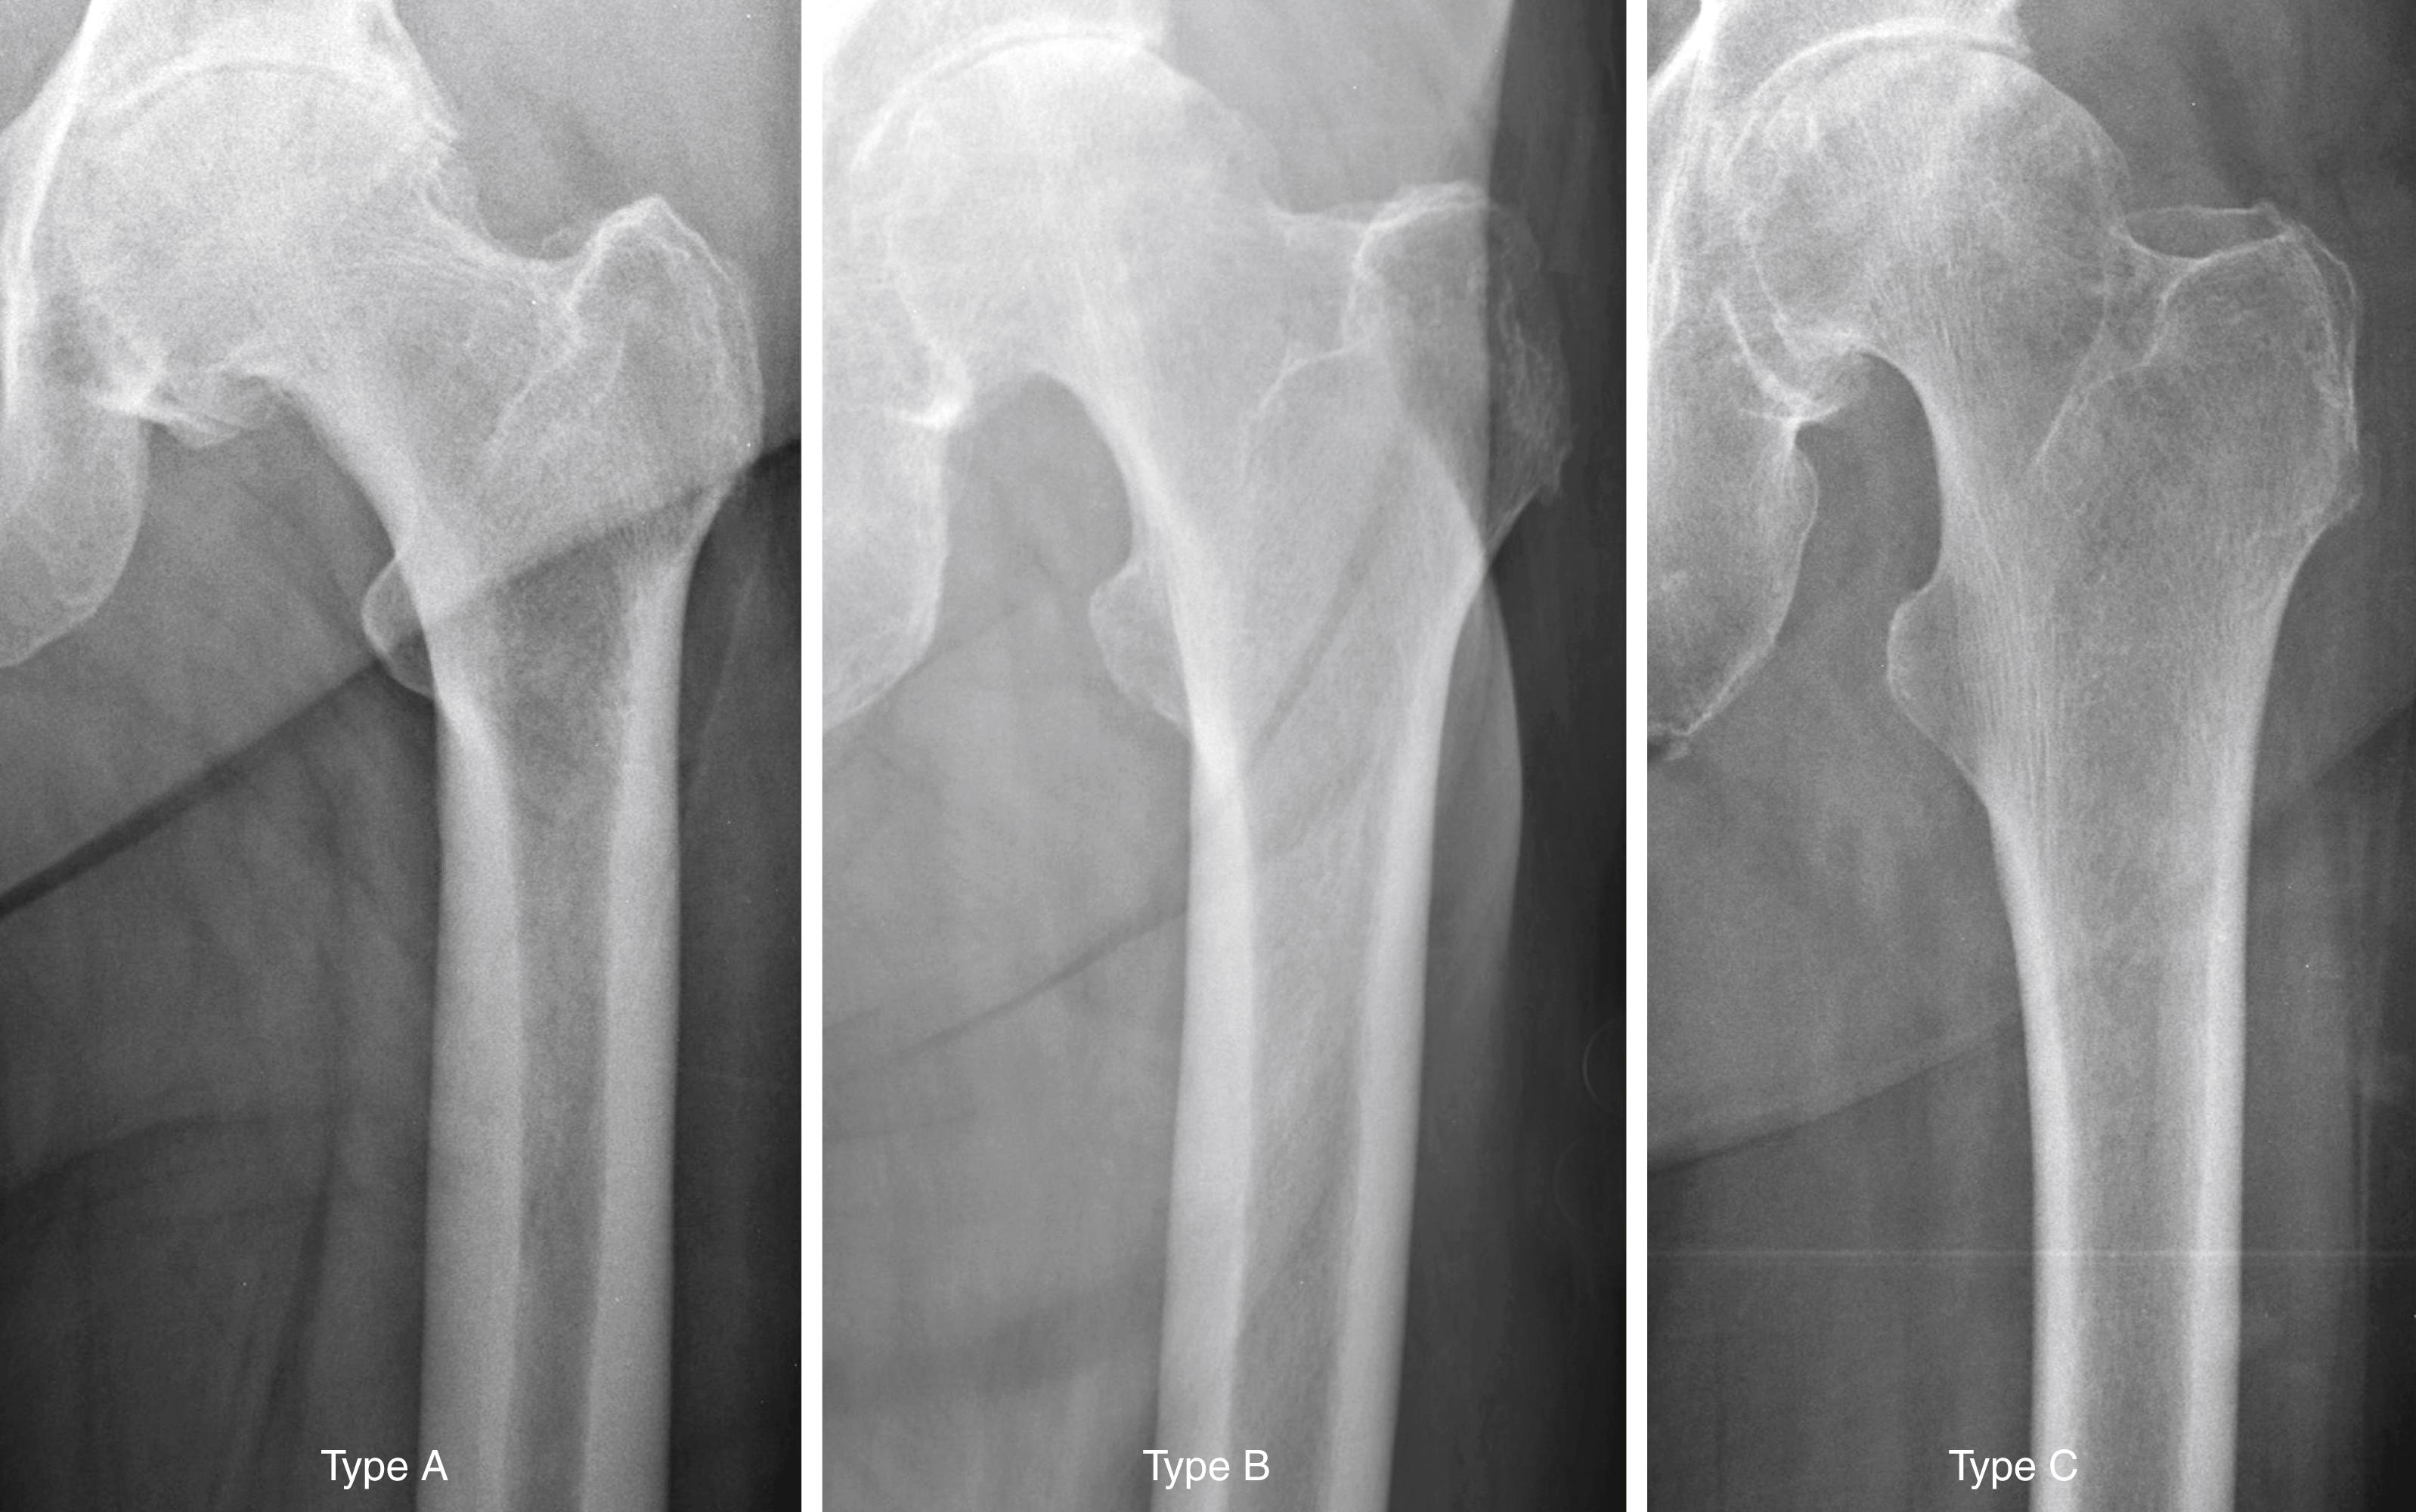 FIGURE 3.3, Dorr radiographic categorization of proximal femurs according to shape, correlation with cortical thickness, and canal dimension.